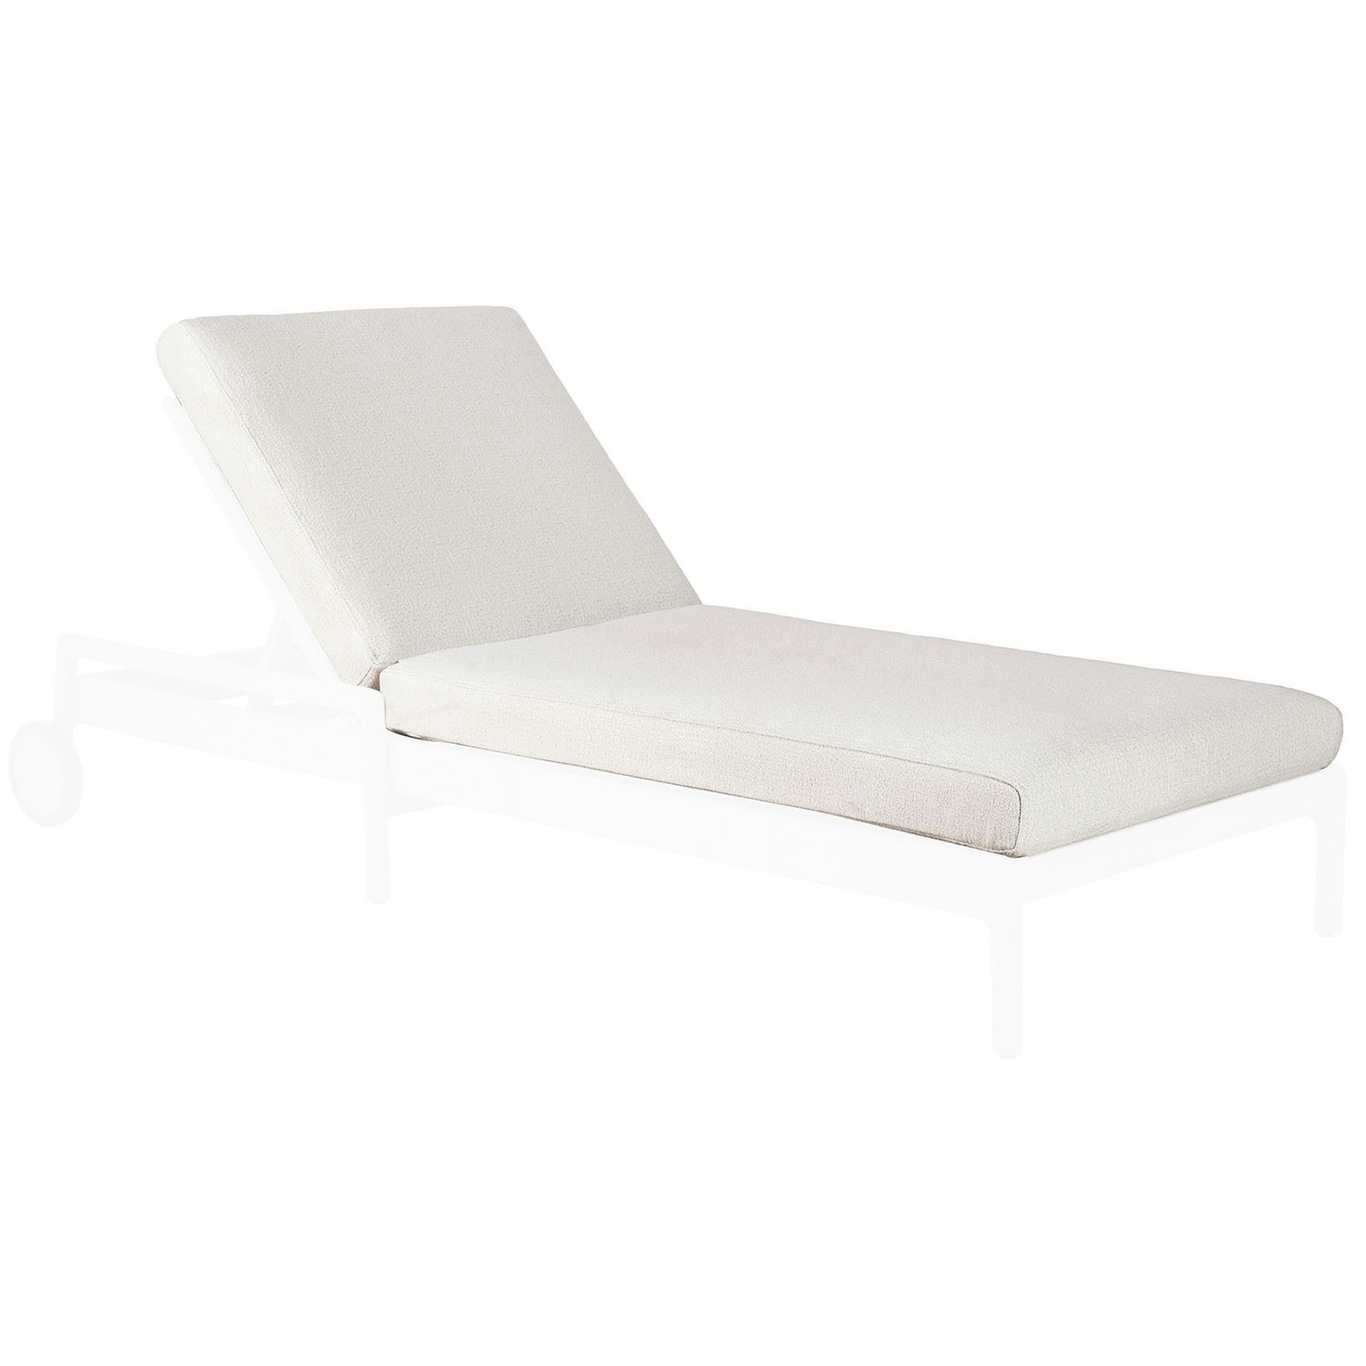 Jack Cushion For Sunbed 80 mm, Off-white